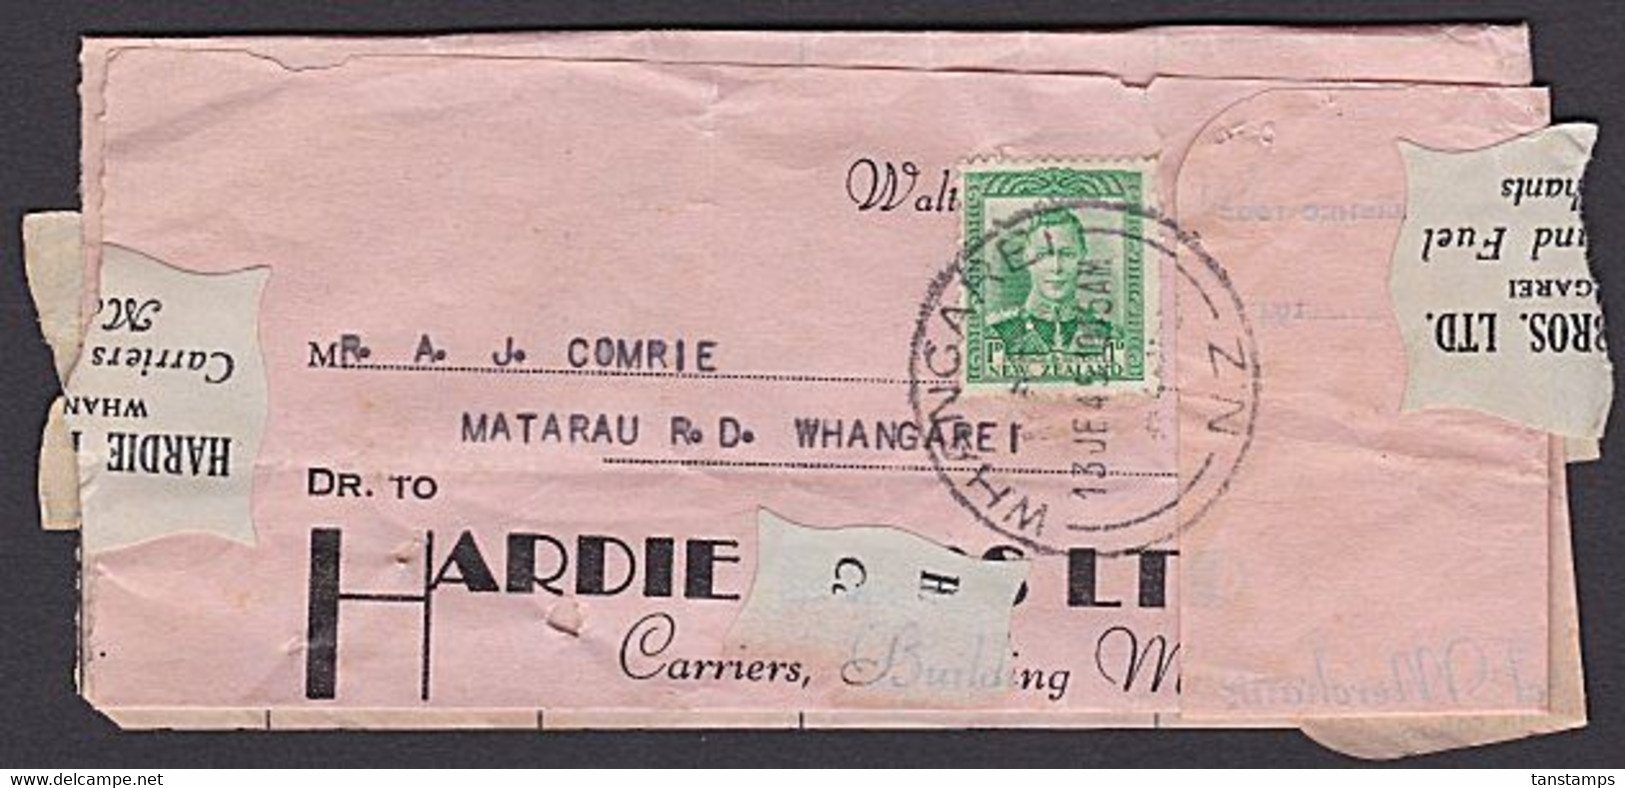 NEW ZEALAND HARDIE BROS CINDERELLA ENVELOPE SAVER STICKER LABEL DURING WWII PAPER SHORTAGE - Covers & Documents